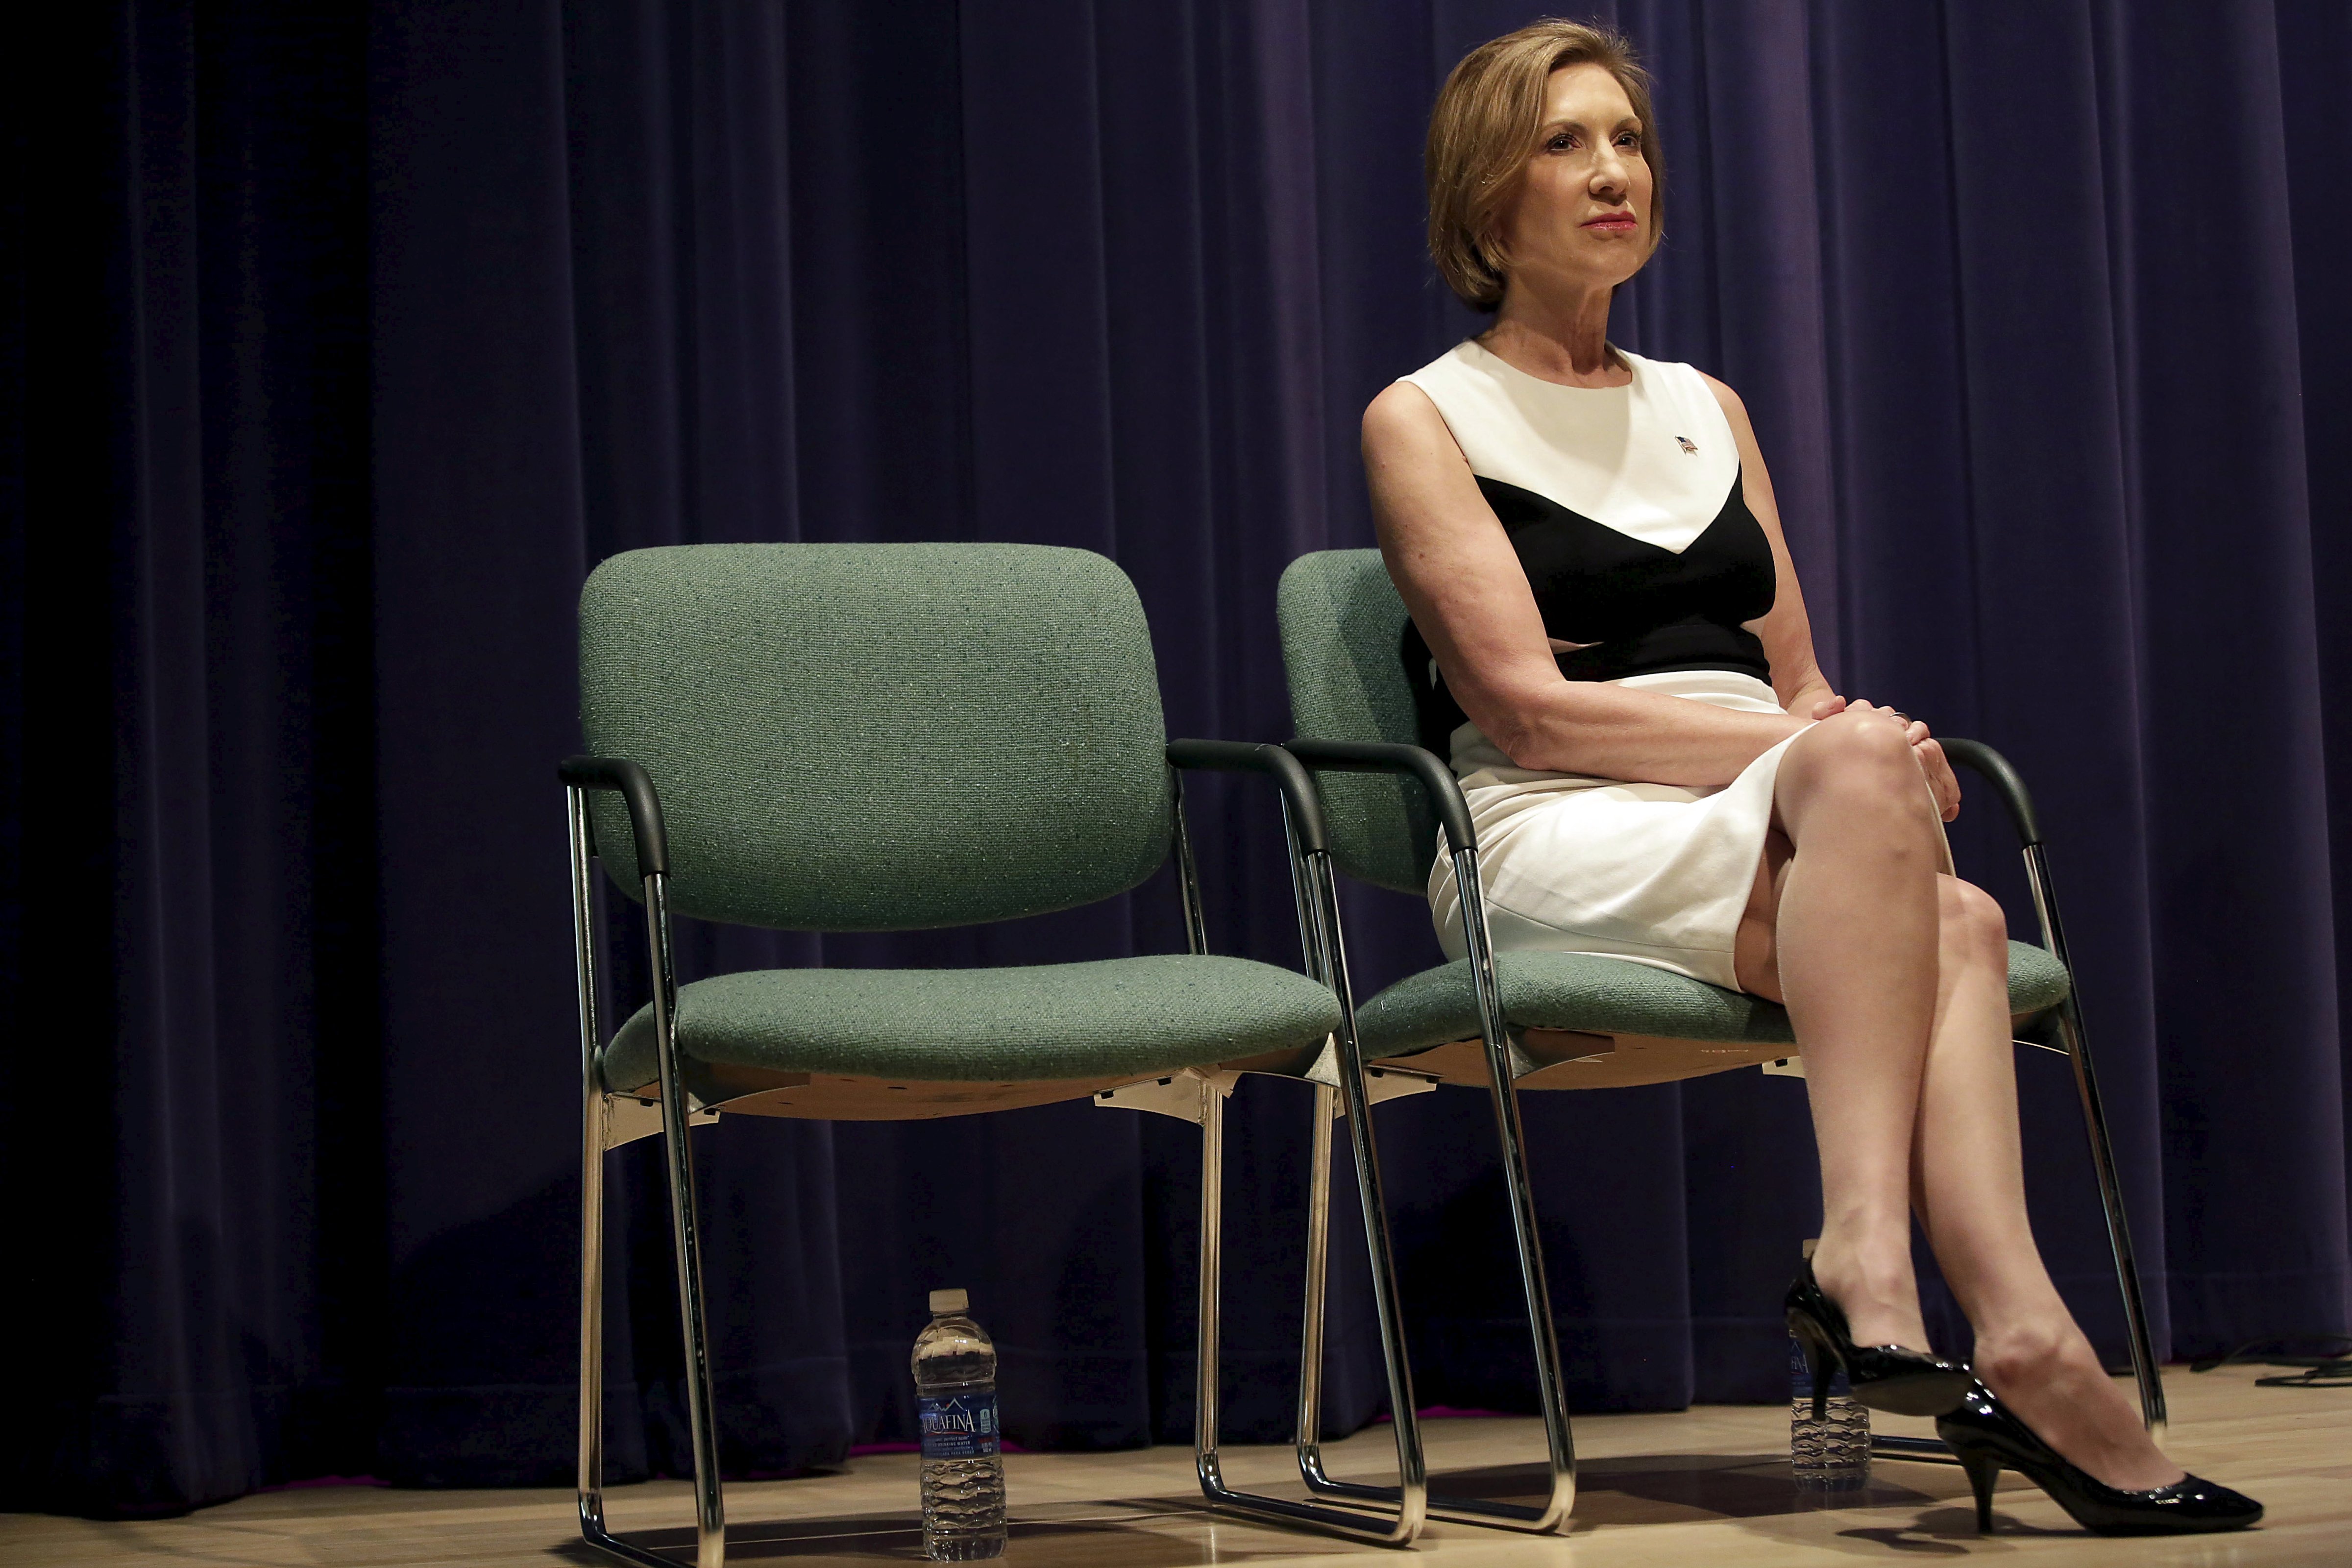 Carly Fiorina waits to be introduced before speaking during a campaign event at the Jewish Federation of Greater Des Moines in Waukee, Iowa on Aug. 16, 2015. (Joshua Lott— Reuters)